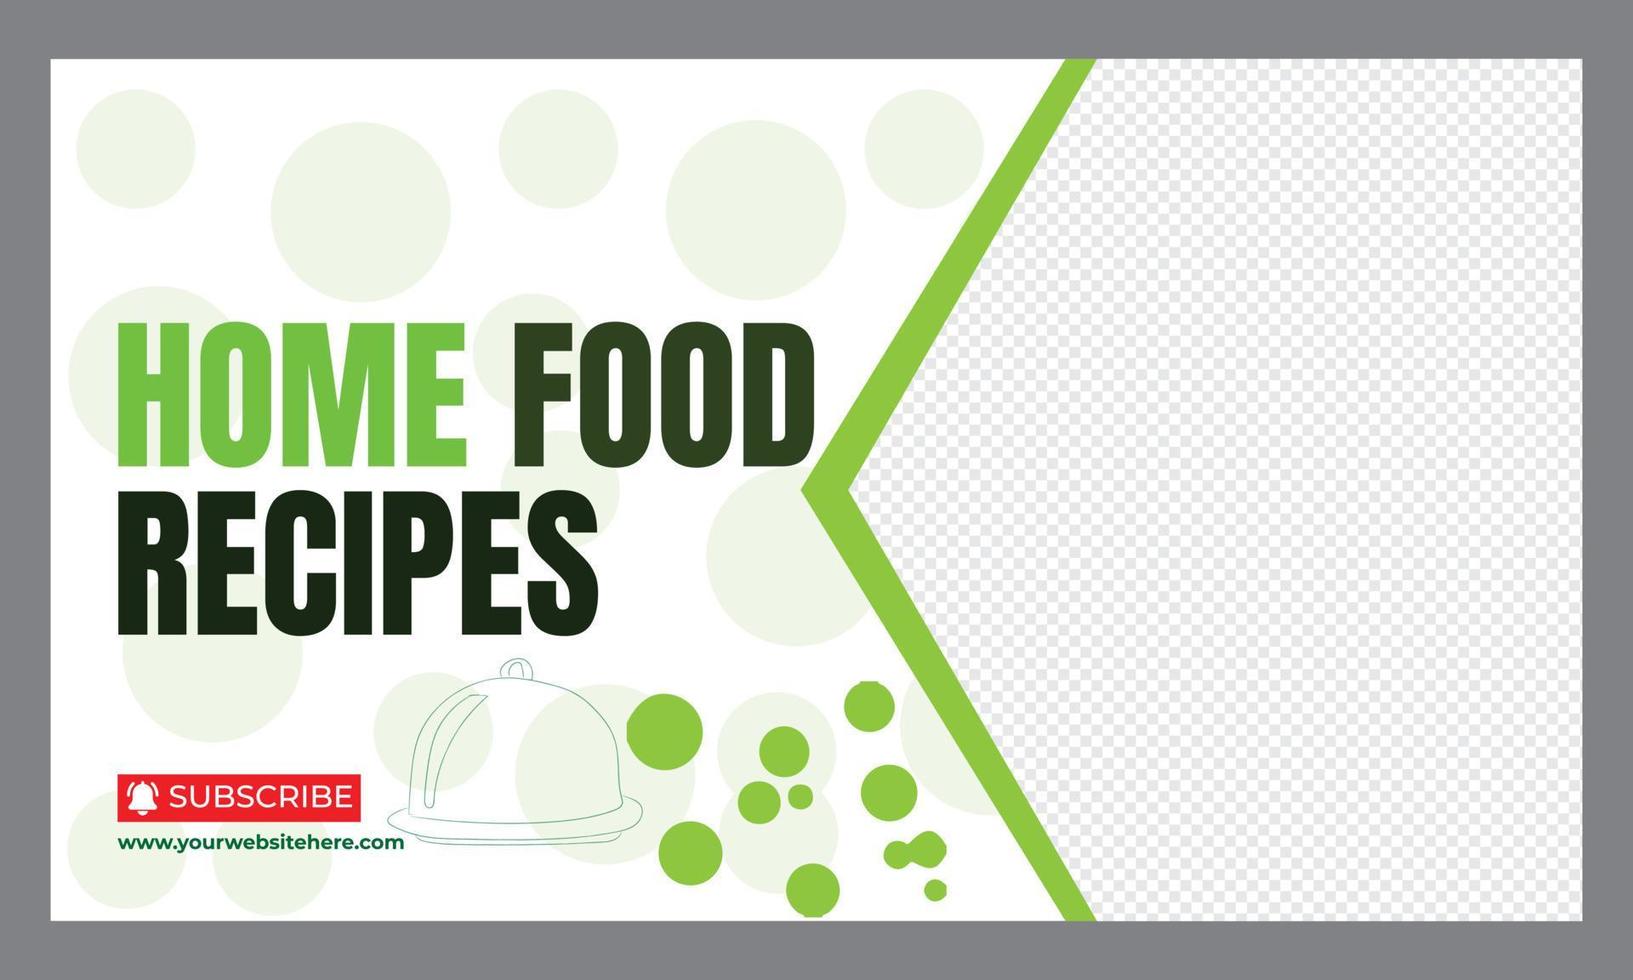 Home Made food recipes video thumbnail template design vector